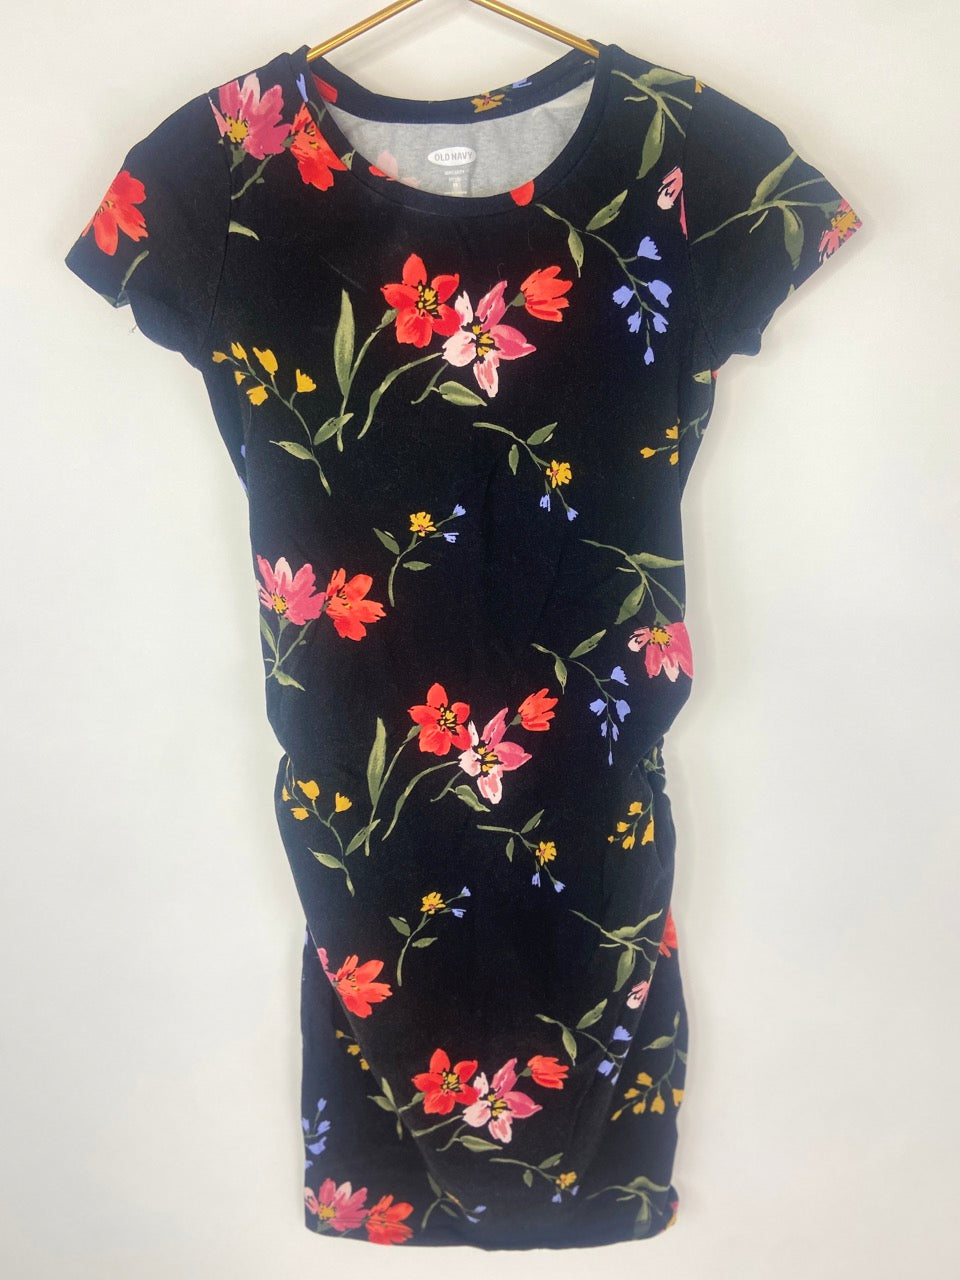 Black Floral Fitted Maternity Dress- XS